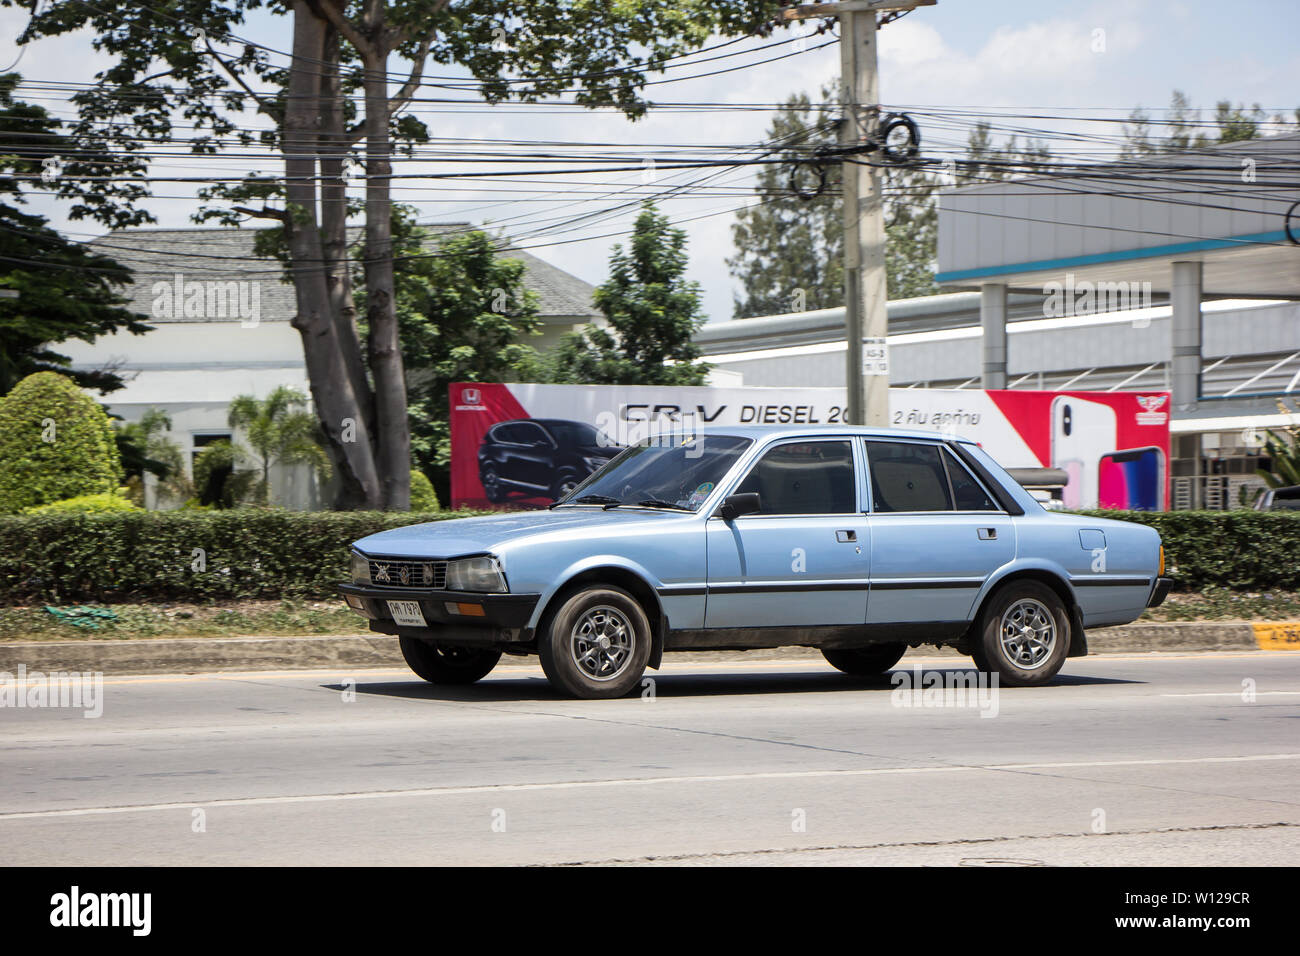 Chiangmai, Thailand - June 21 2019: Private Old Car, Peugeot 505 GR. Photo at road no.121 about 8 km from downtown Chiangmai, thailand. Stock Photo